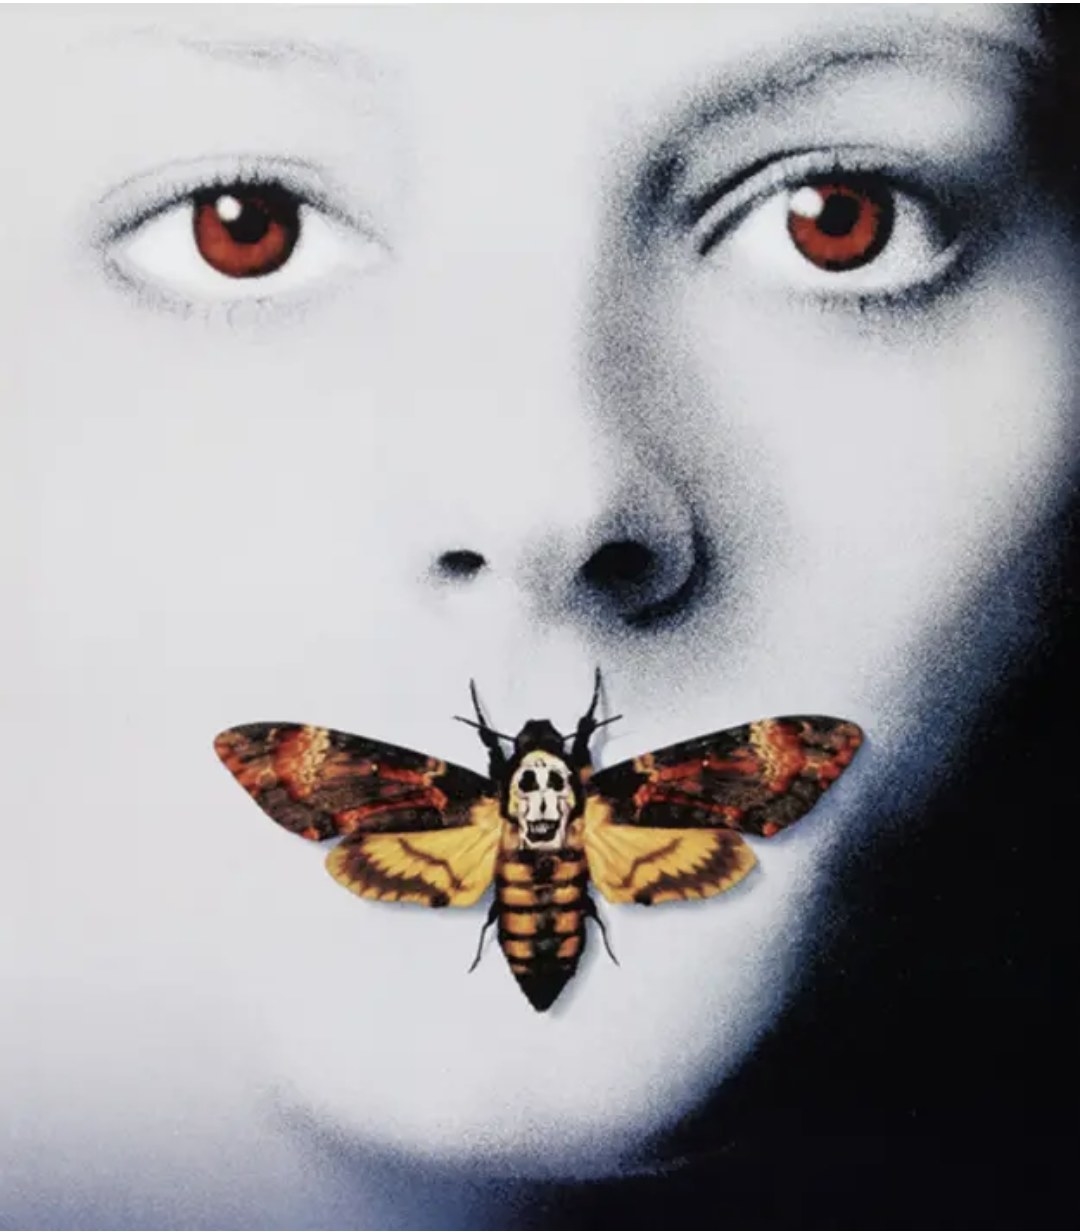 Jodie Foster and a butterfly over her mouth